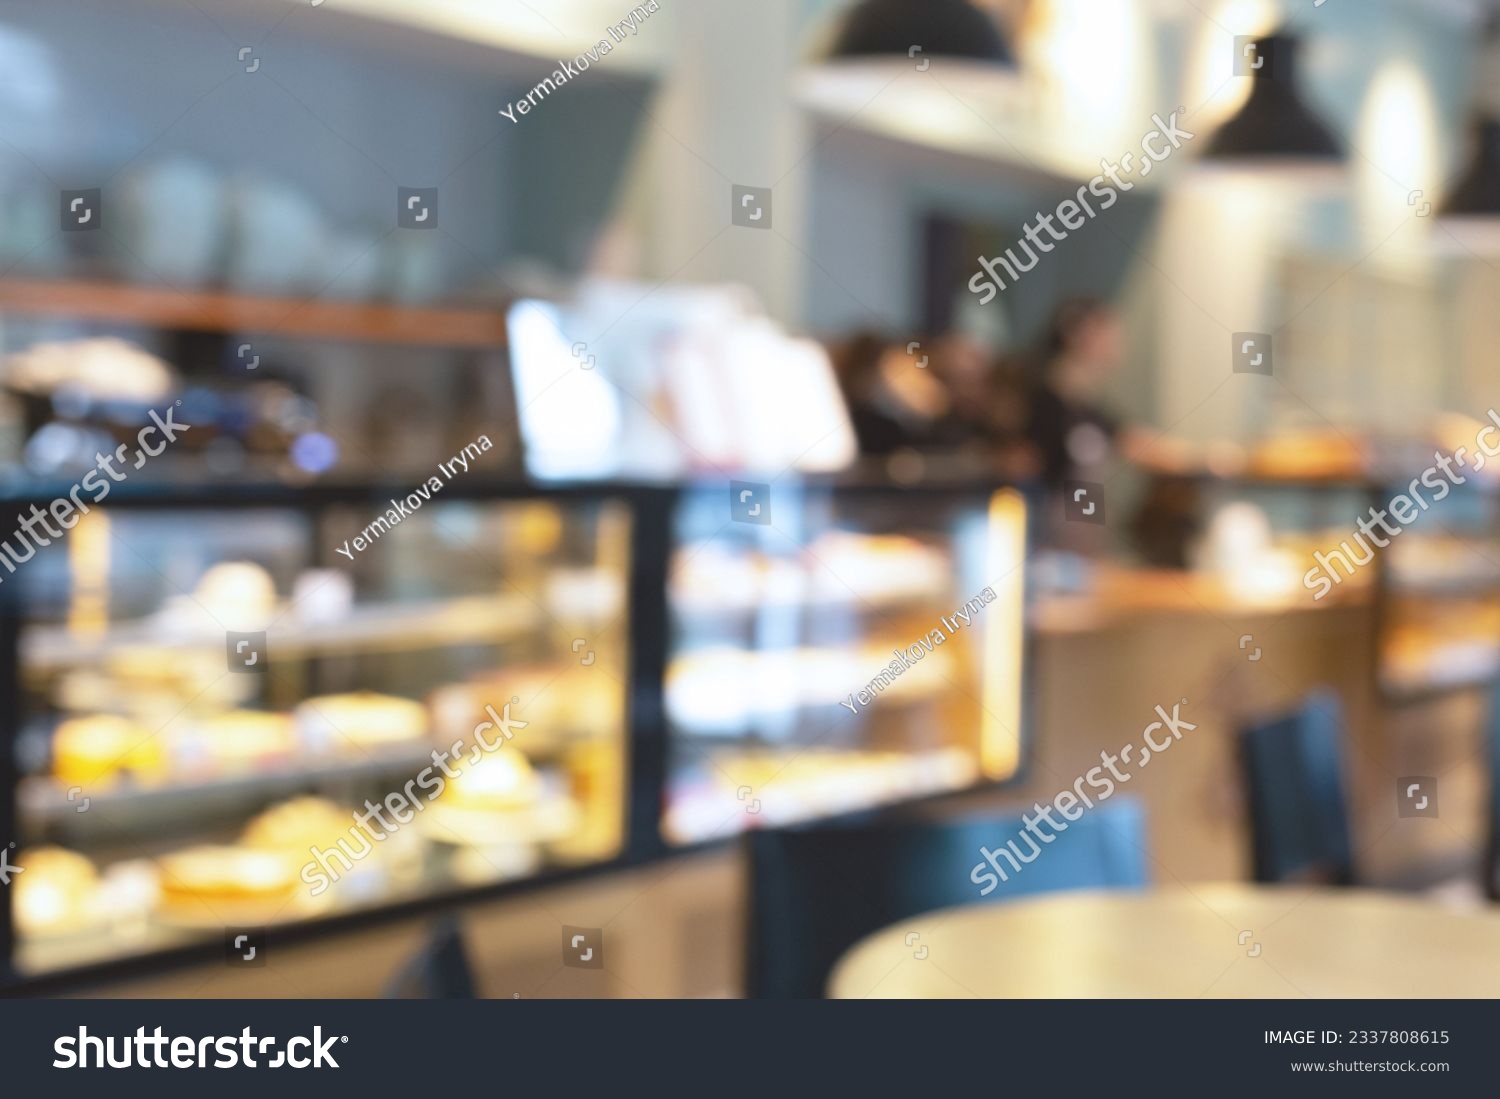 Blurred image of pastry shop interior background. Defocused view of a showcase with confectionery. Bokeh lighting. #2337808615